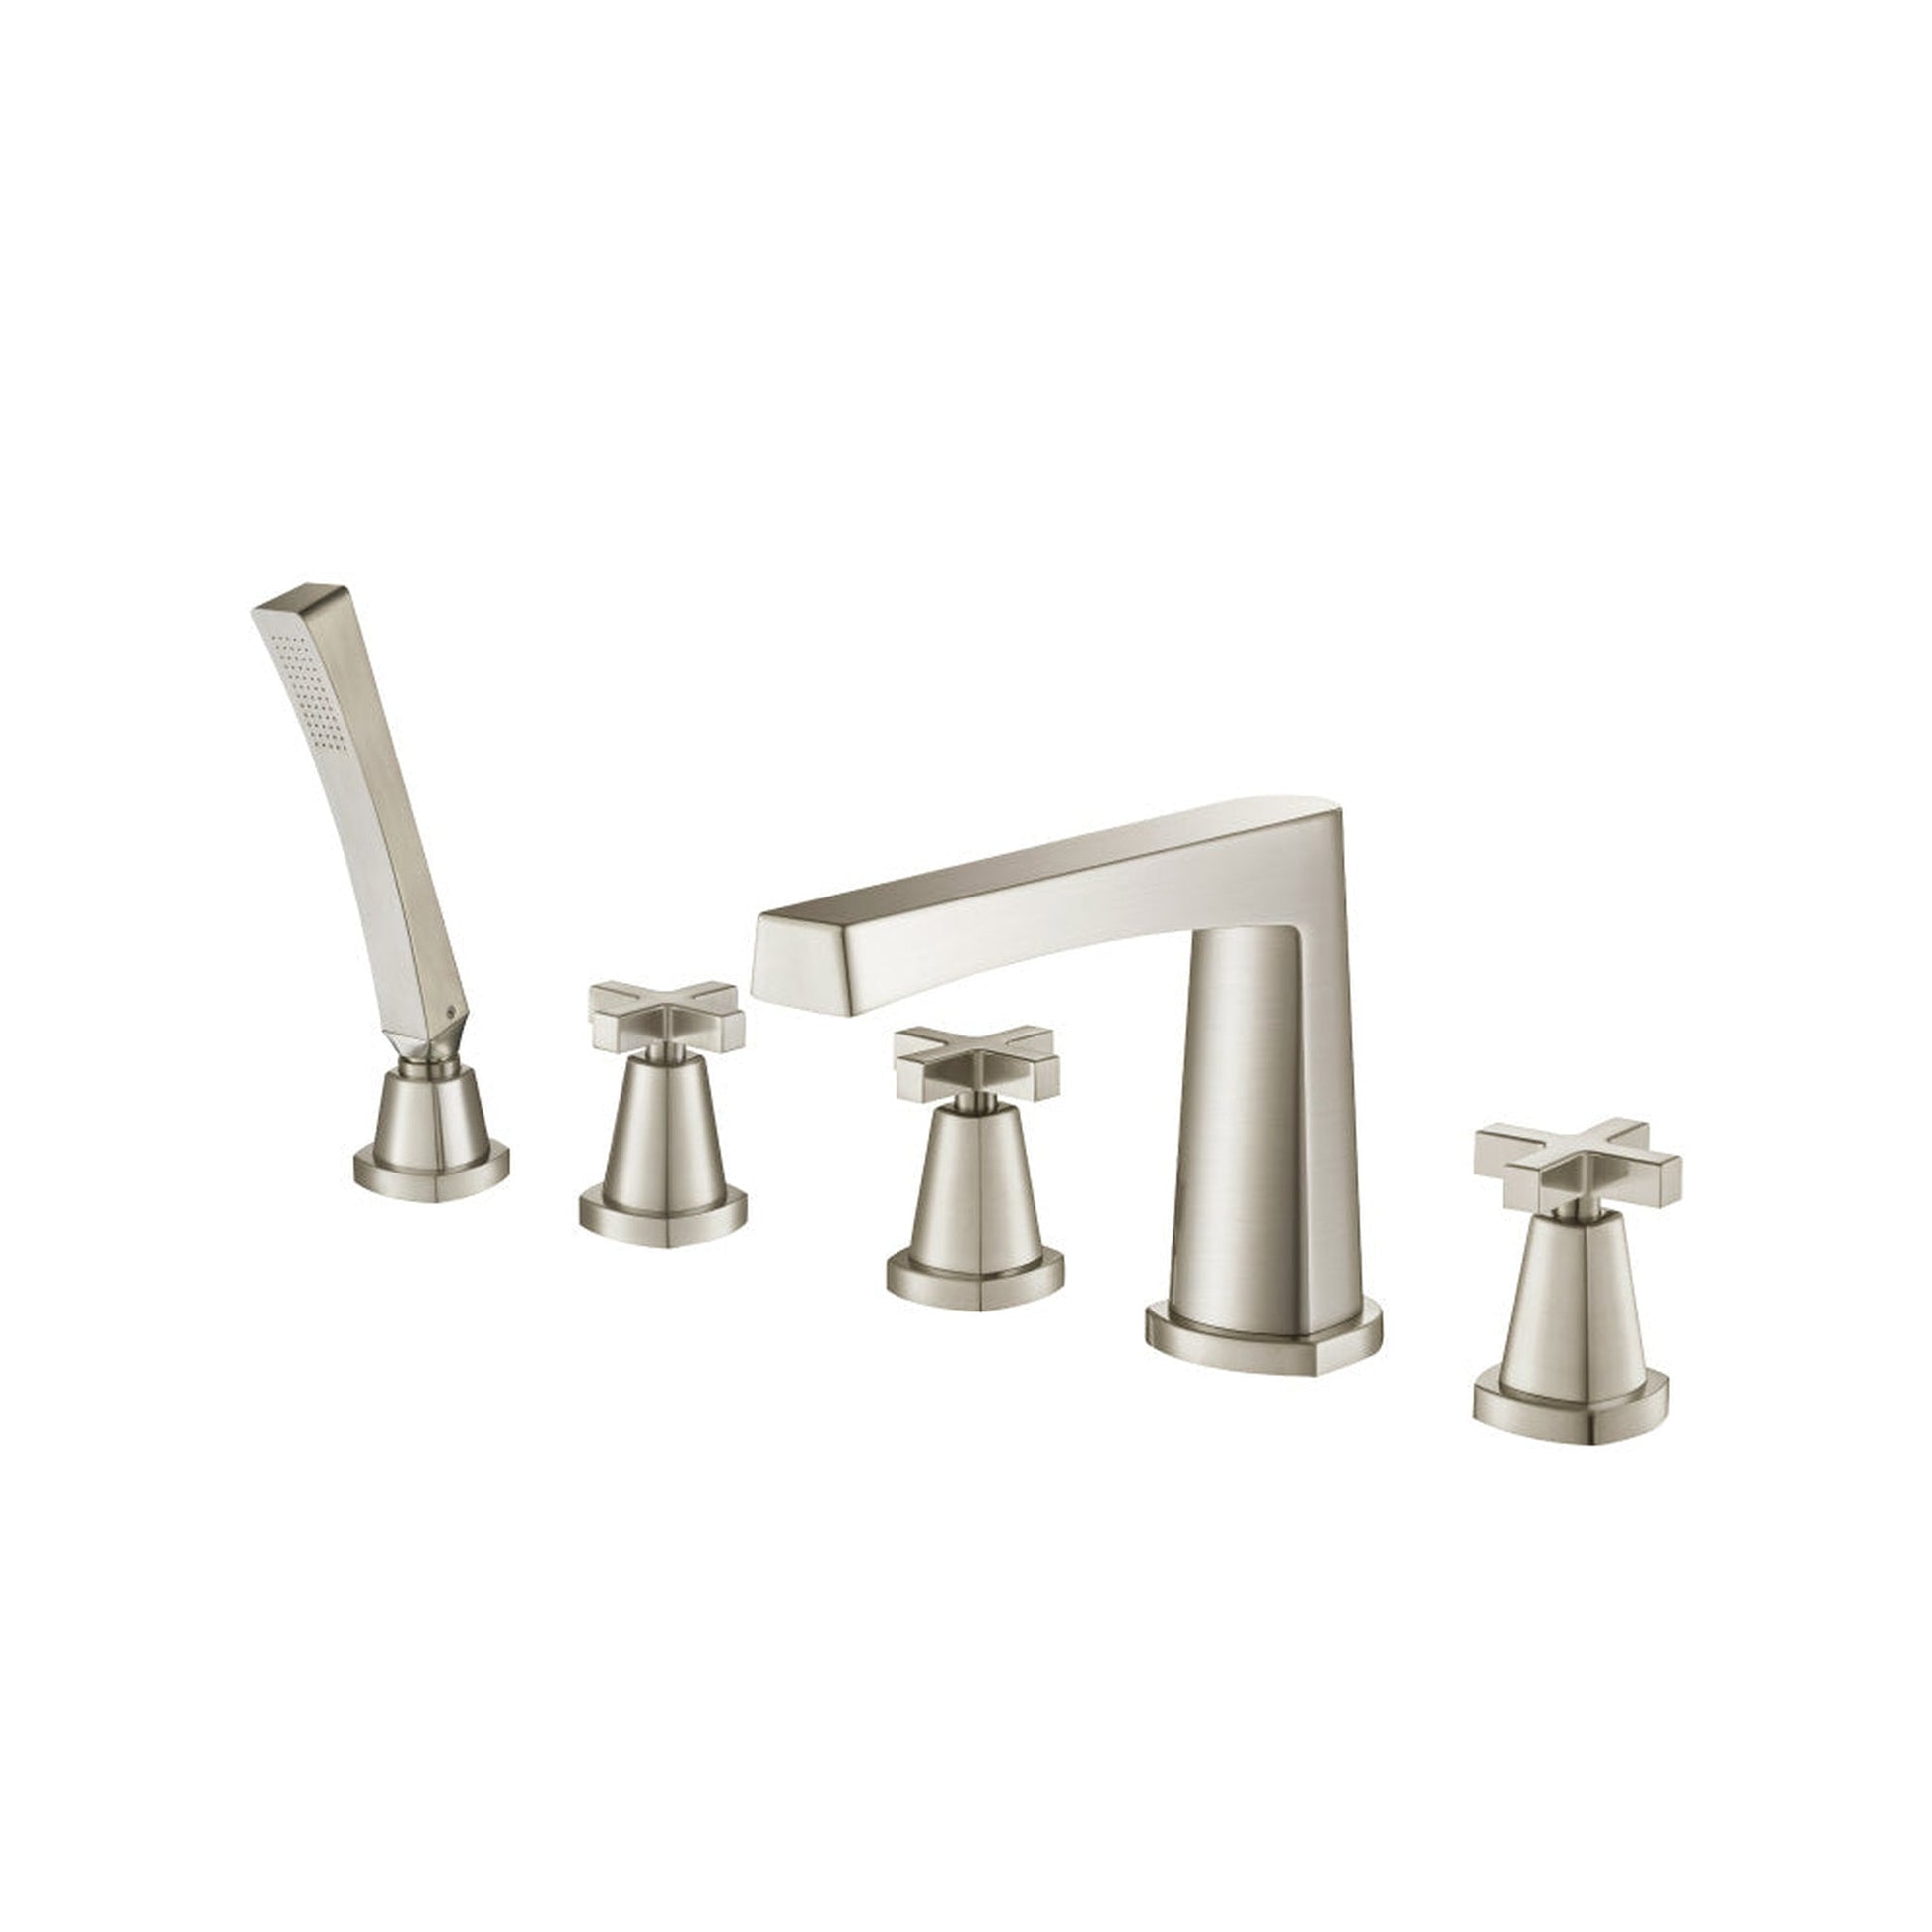 Isenberg Serie 240 Five Hole Deck Mounted Roman Tub Faucet With Hand Shower in Brushed Nickel